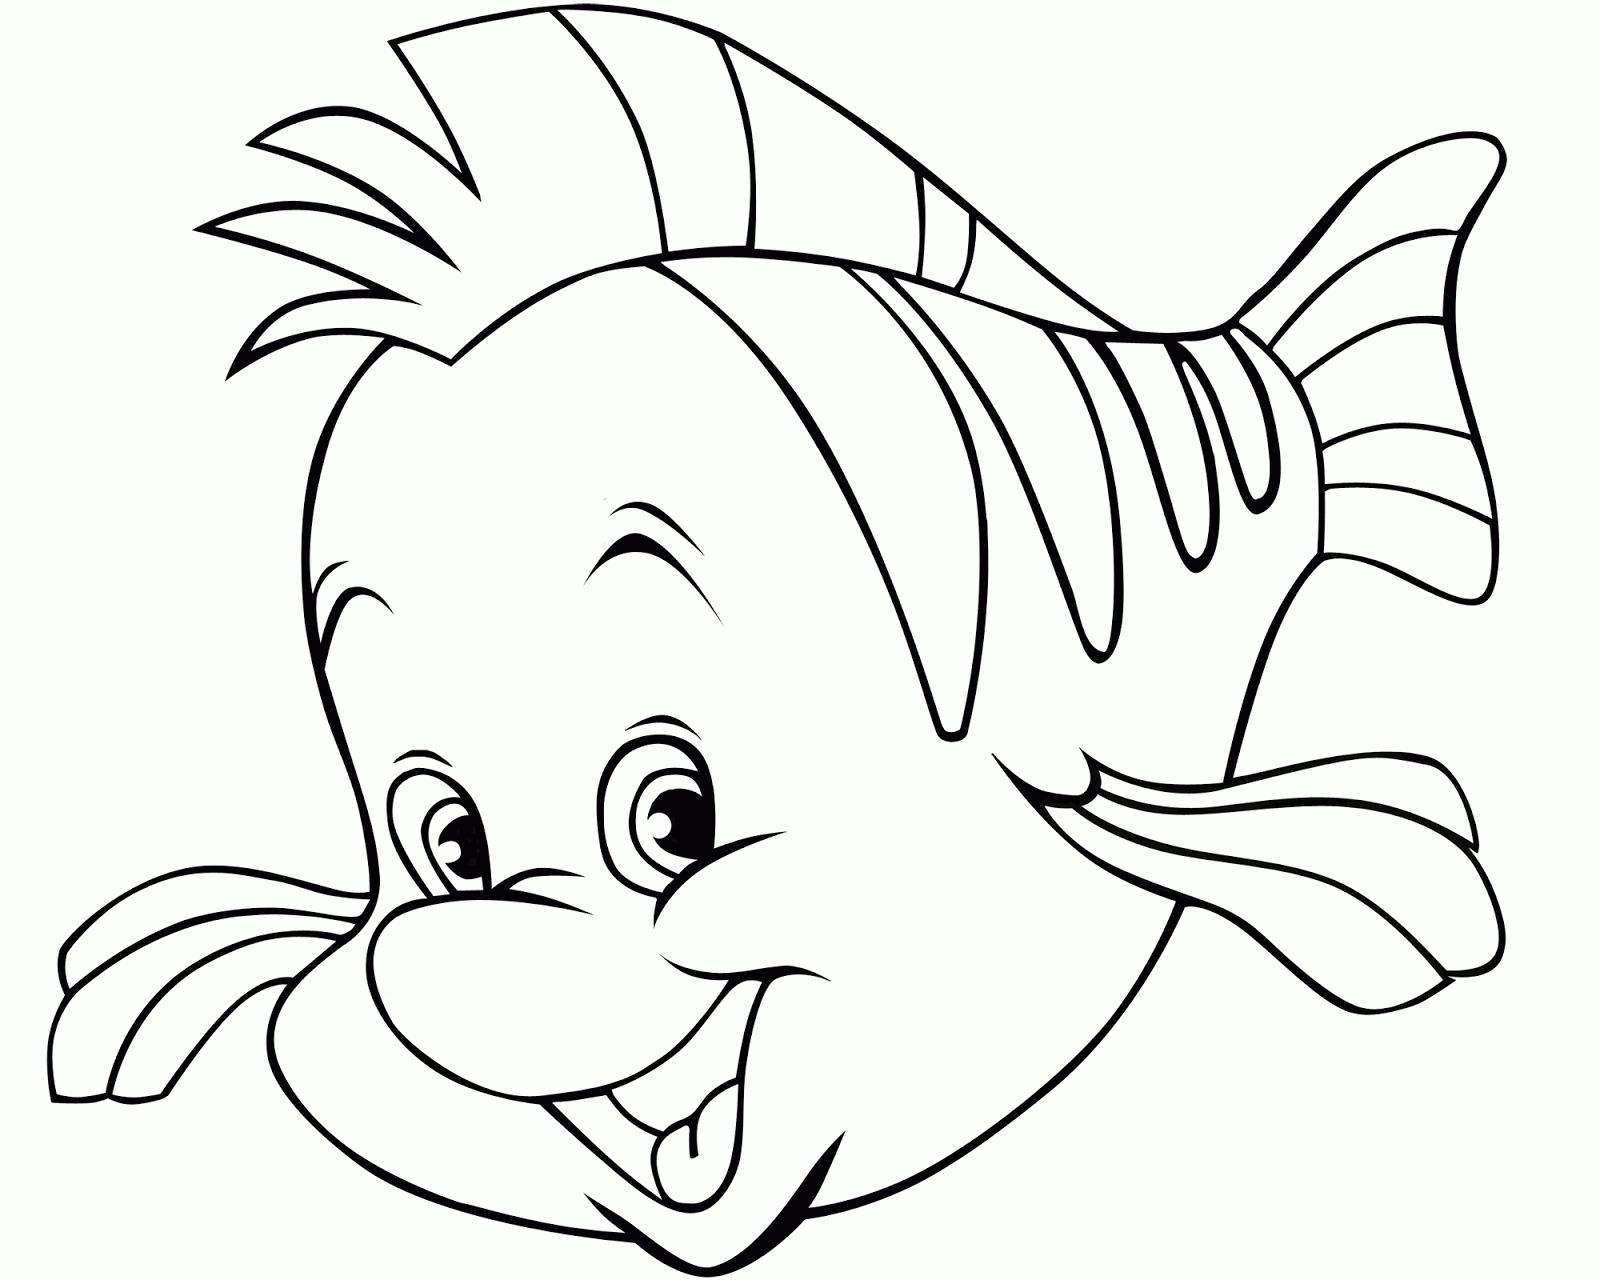 Flounder Fish Coloring Pages